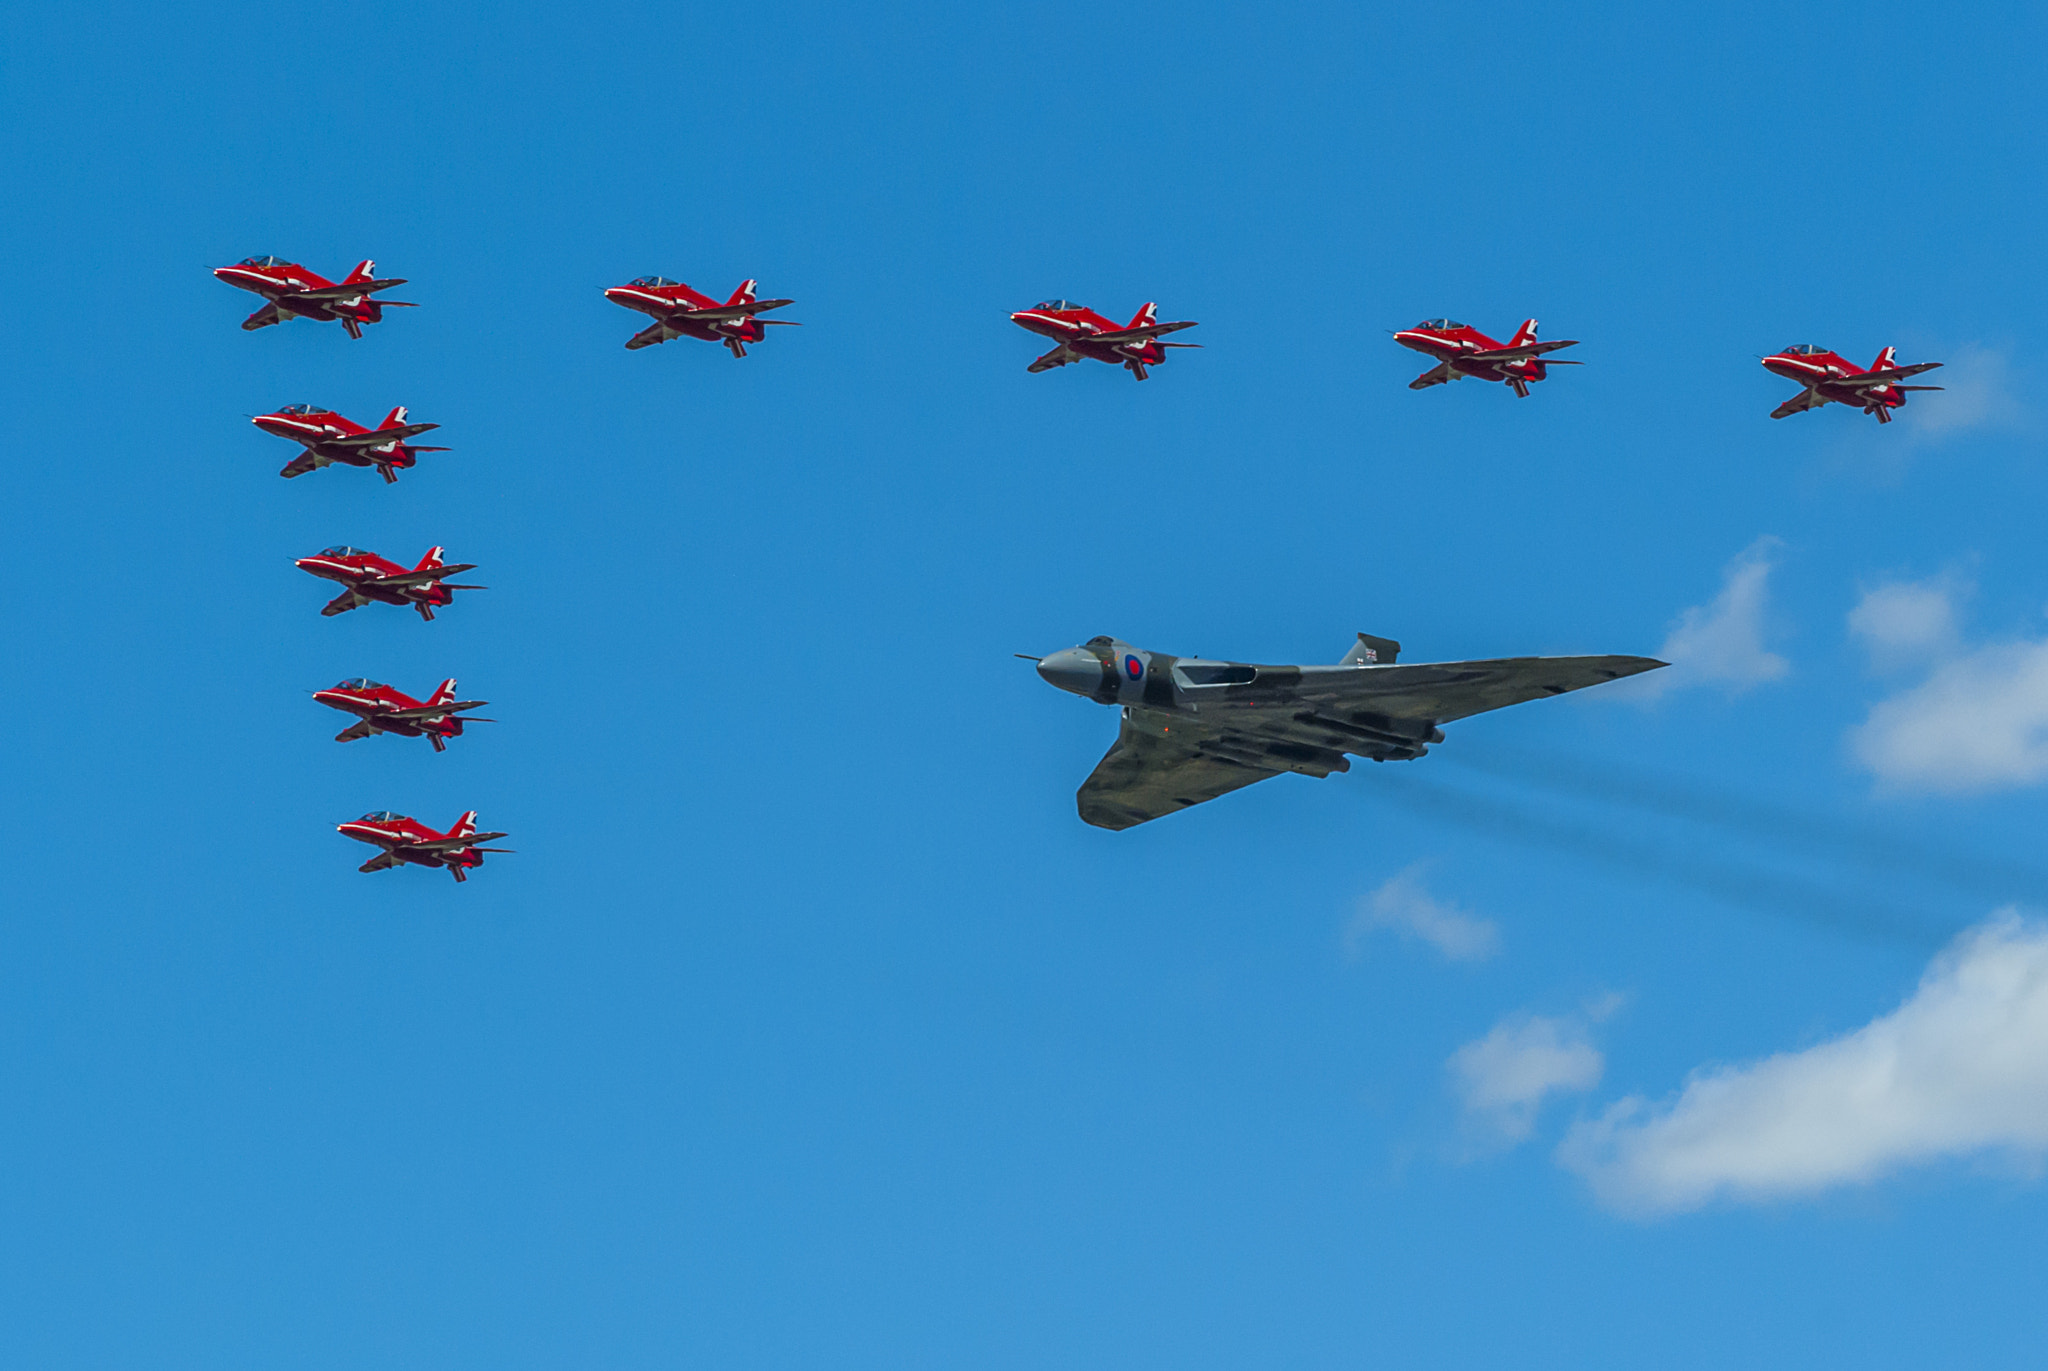 Sony Alpha DSLR-A200 + Tamron AF 70-300mm F4-5.6 Di LD Macro sample photo. Vulcan bomber with red arrows escort photography